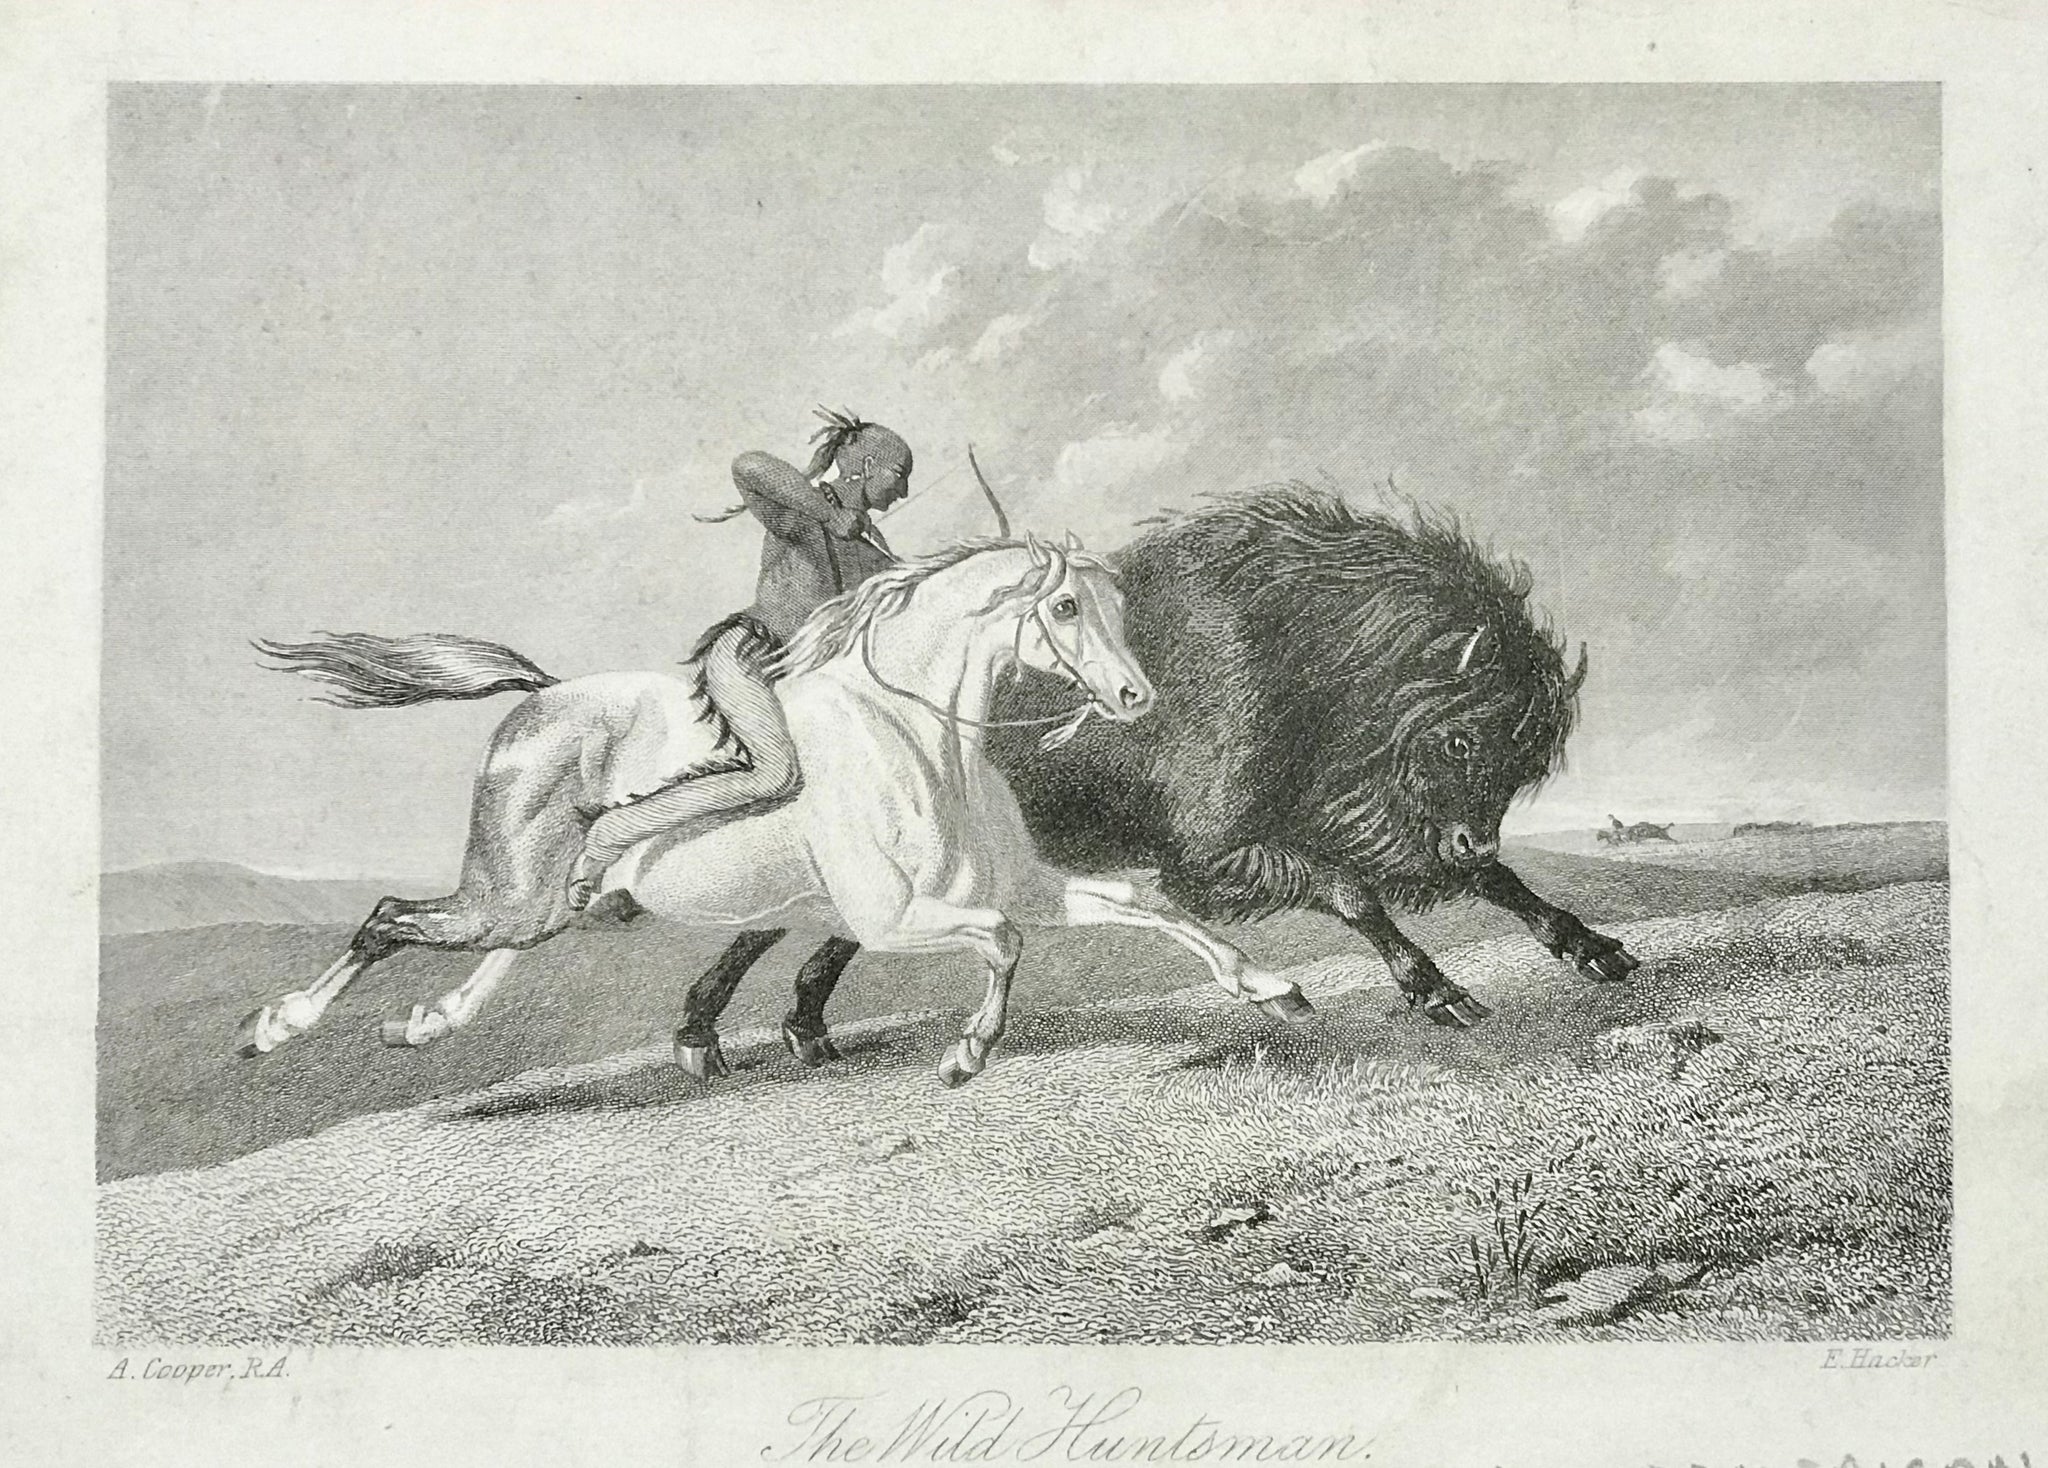 "The Wild Huntsman"  Steel engraving by E. Hacker after A. Cooper ca 1870.  10 x 15 cm ( 3.9 x 5.9 ")